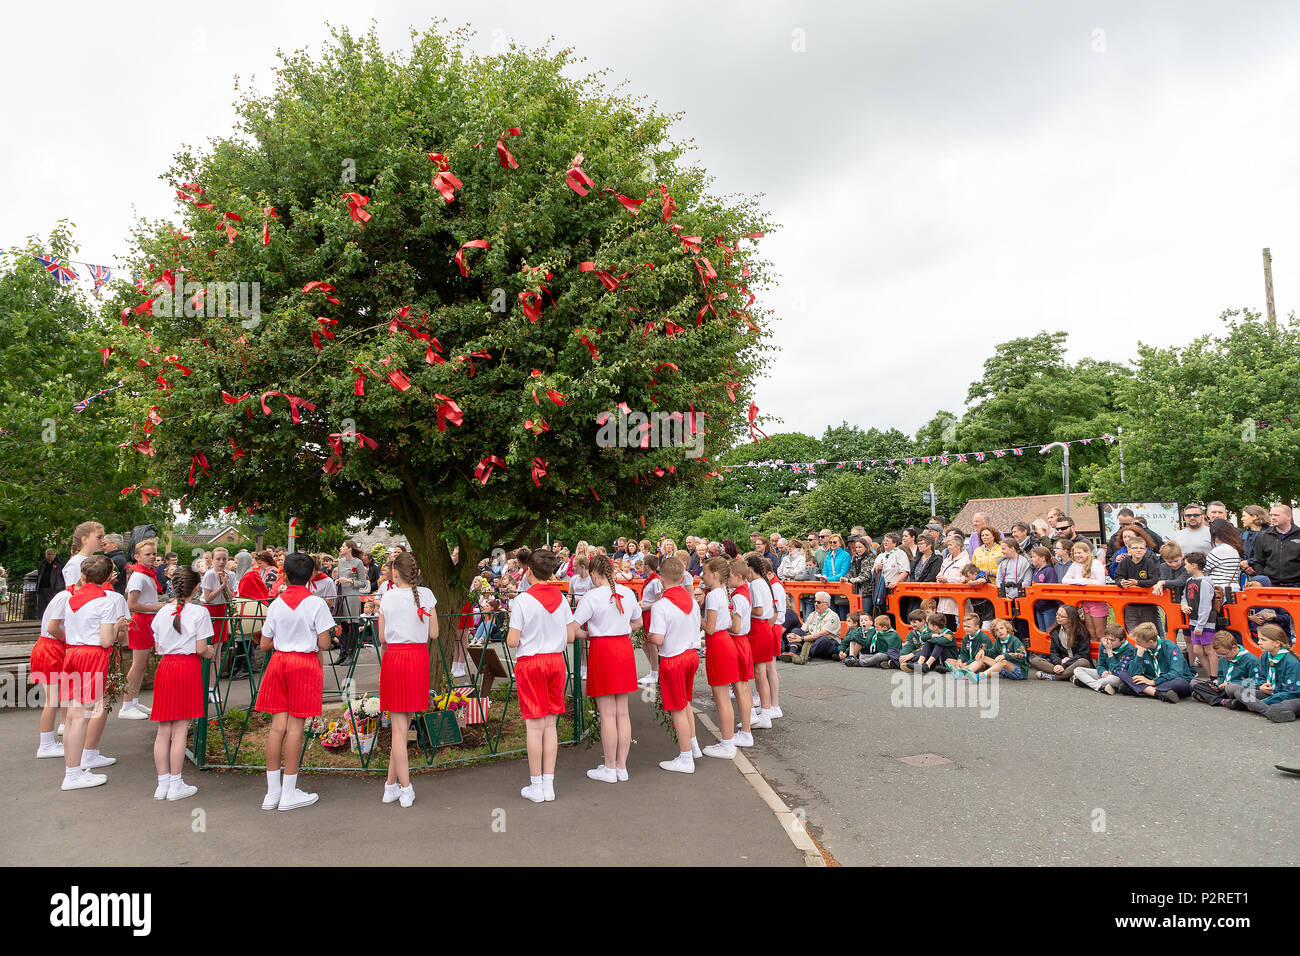 Appleton Thorn, Cheshire. 16 June 2018 - Bawming the Thorn at Appleton Thorn, Cheshire, England, UK. A celebration and re=enactment of Adam de Dutton's return from the Crusades Credit: John Hopkins/Alamy Live News Credit: John Hopkins/Alamy Live News Stock Photo